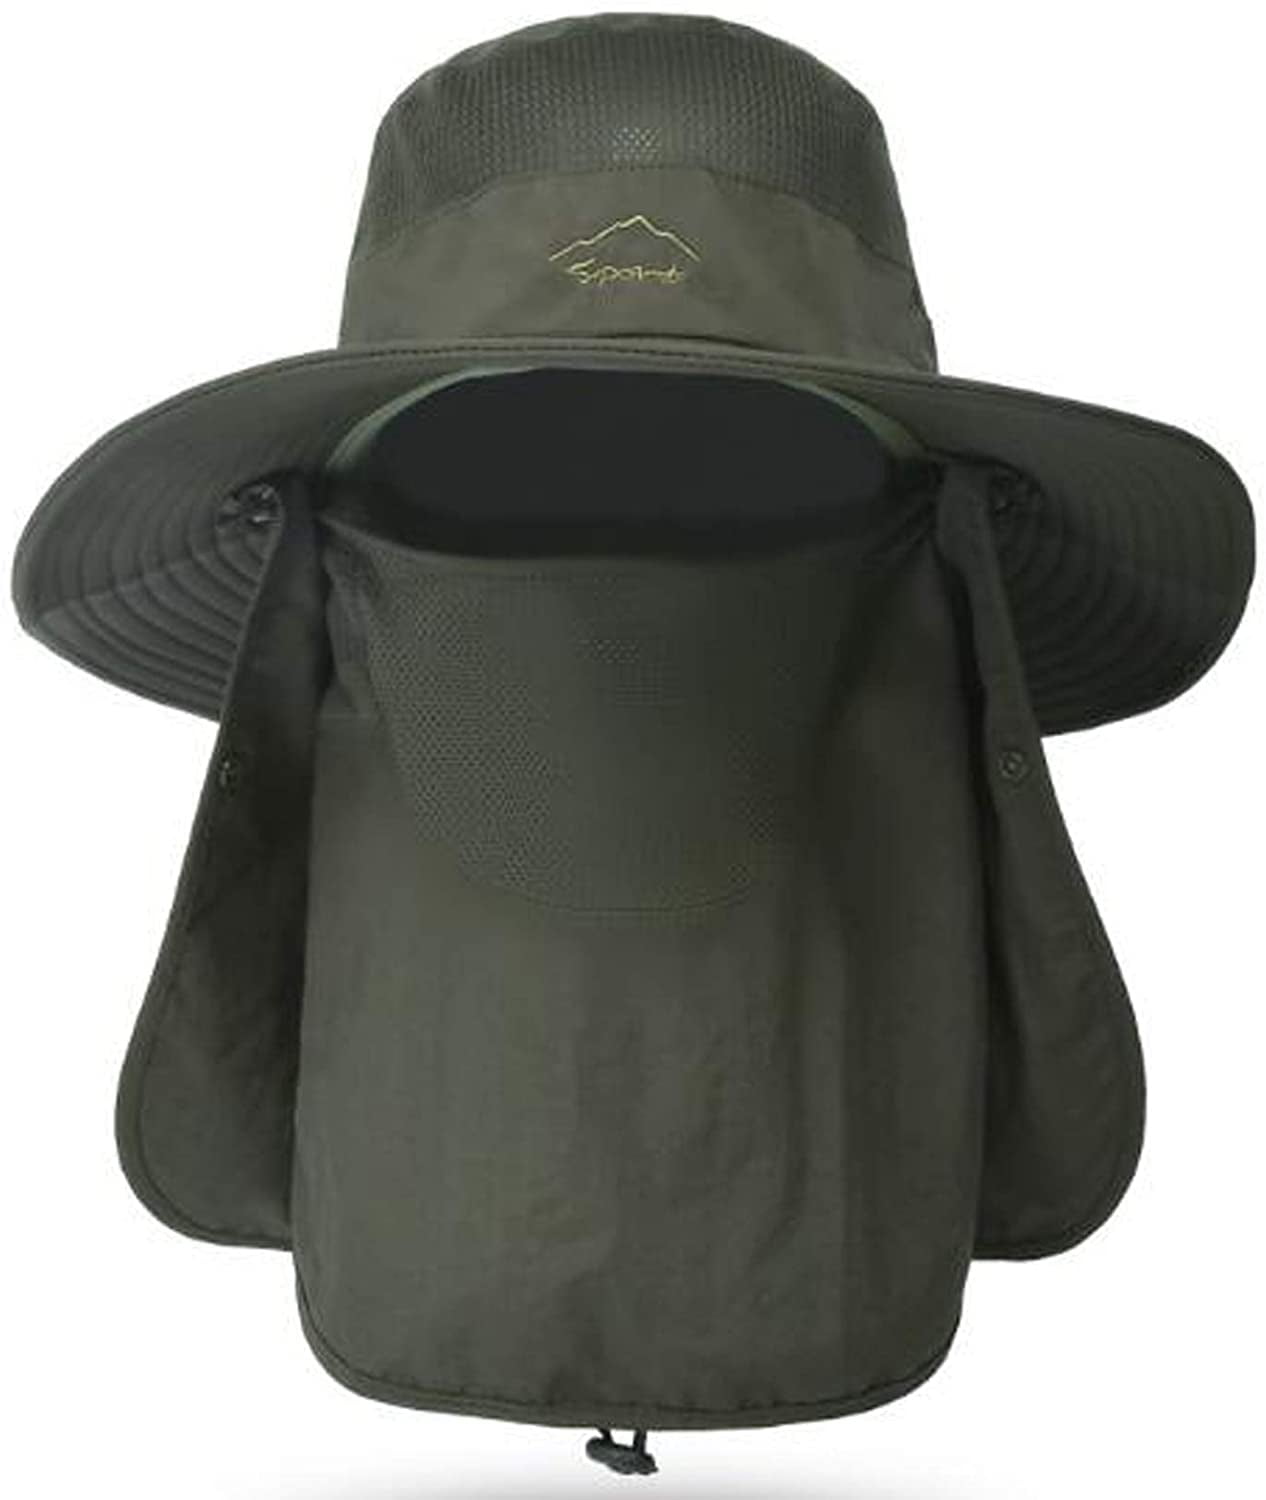 Breathable Outdoor Geartop Fishing Hat For Mountaineering, Fishing, And  Summer Activities Face Covering Bucket Hat With Sunscreen Cap And Mask From  Dave_store, $3.97